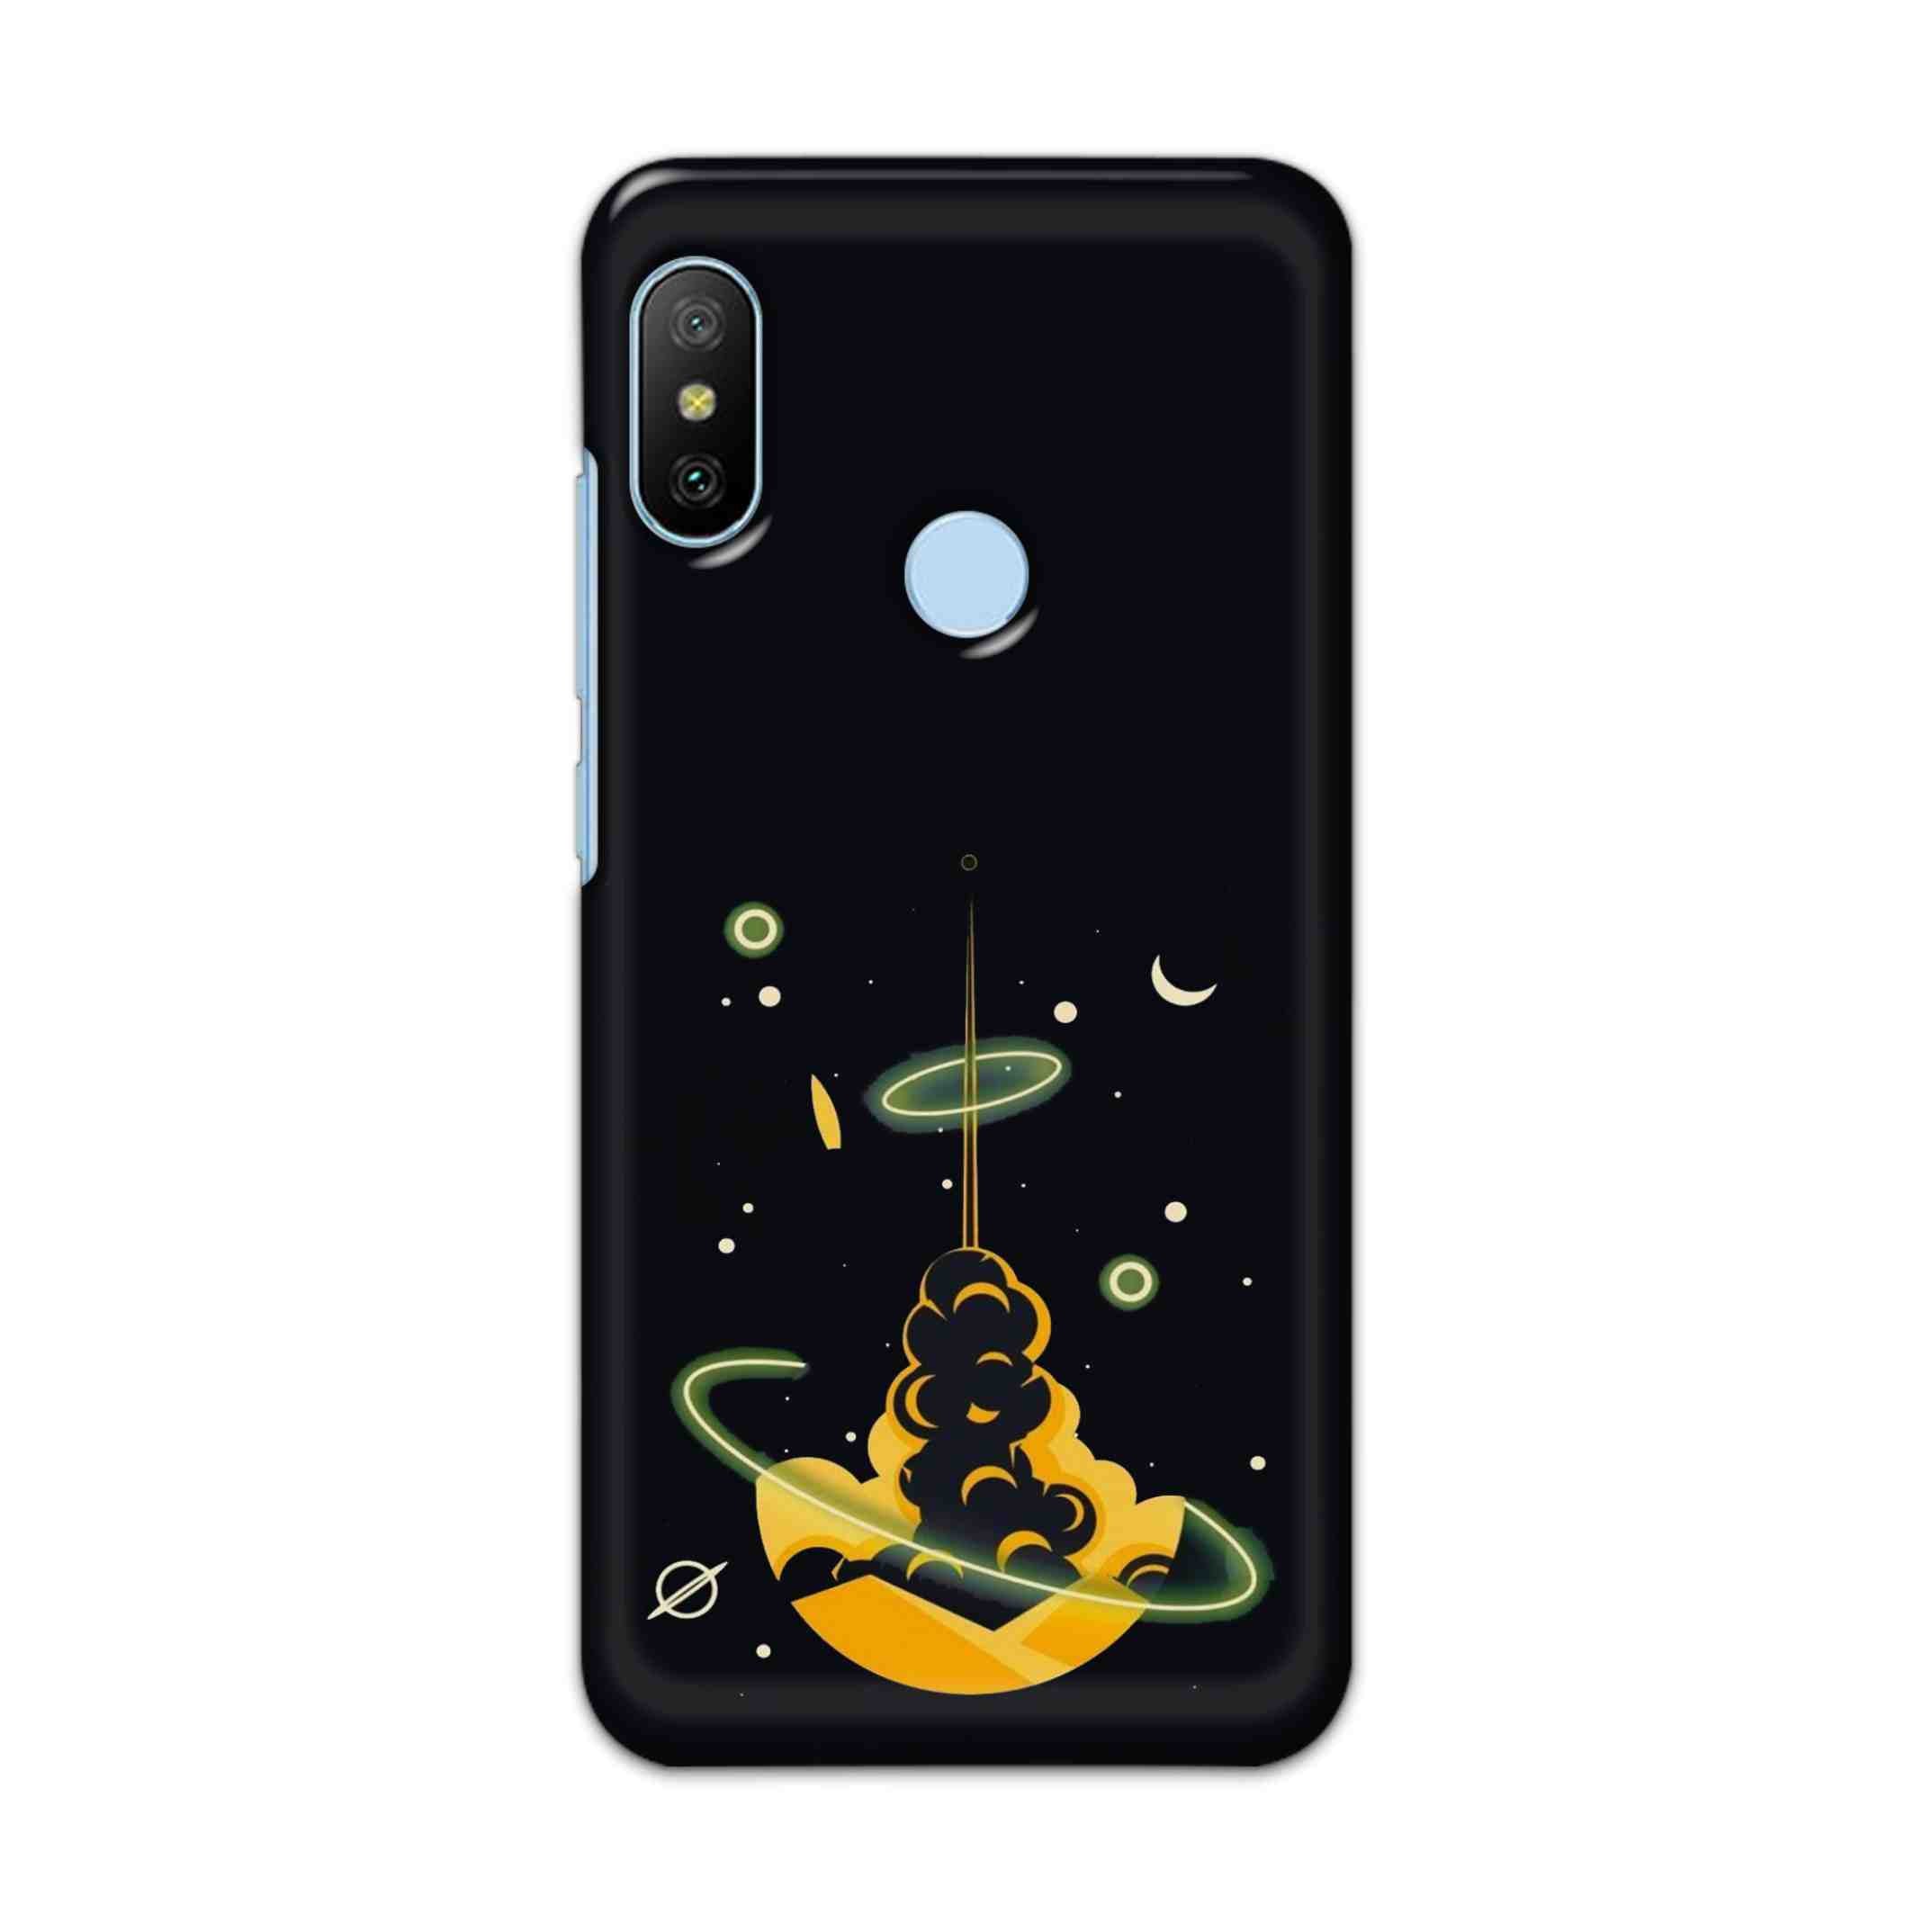 Buy Moon Hard Back Mobile Phone Case/Cover For Xiaomi Redmi 6 Pro Online